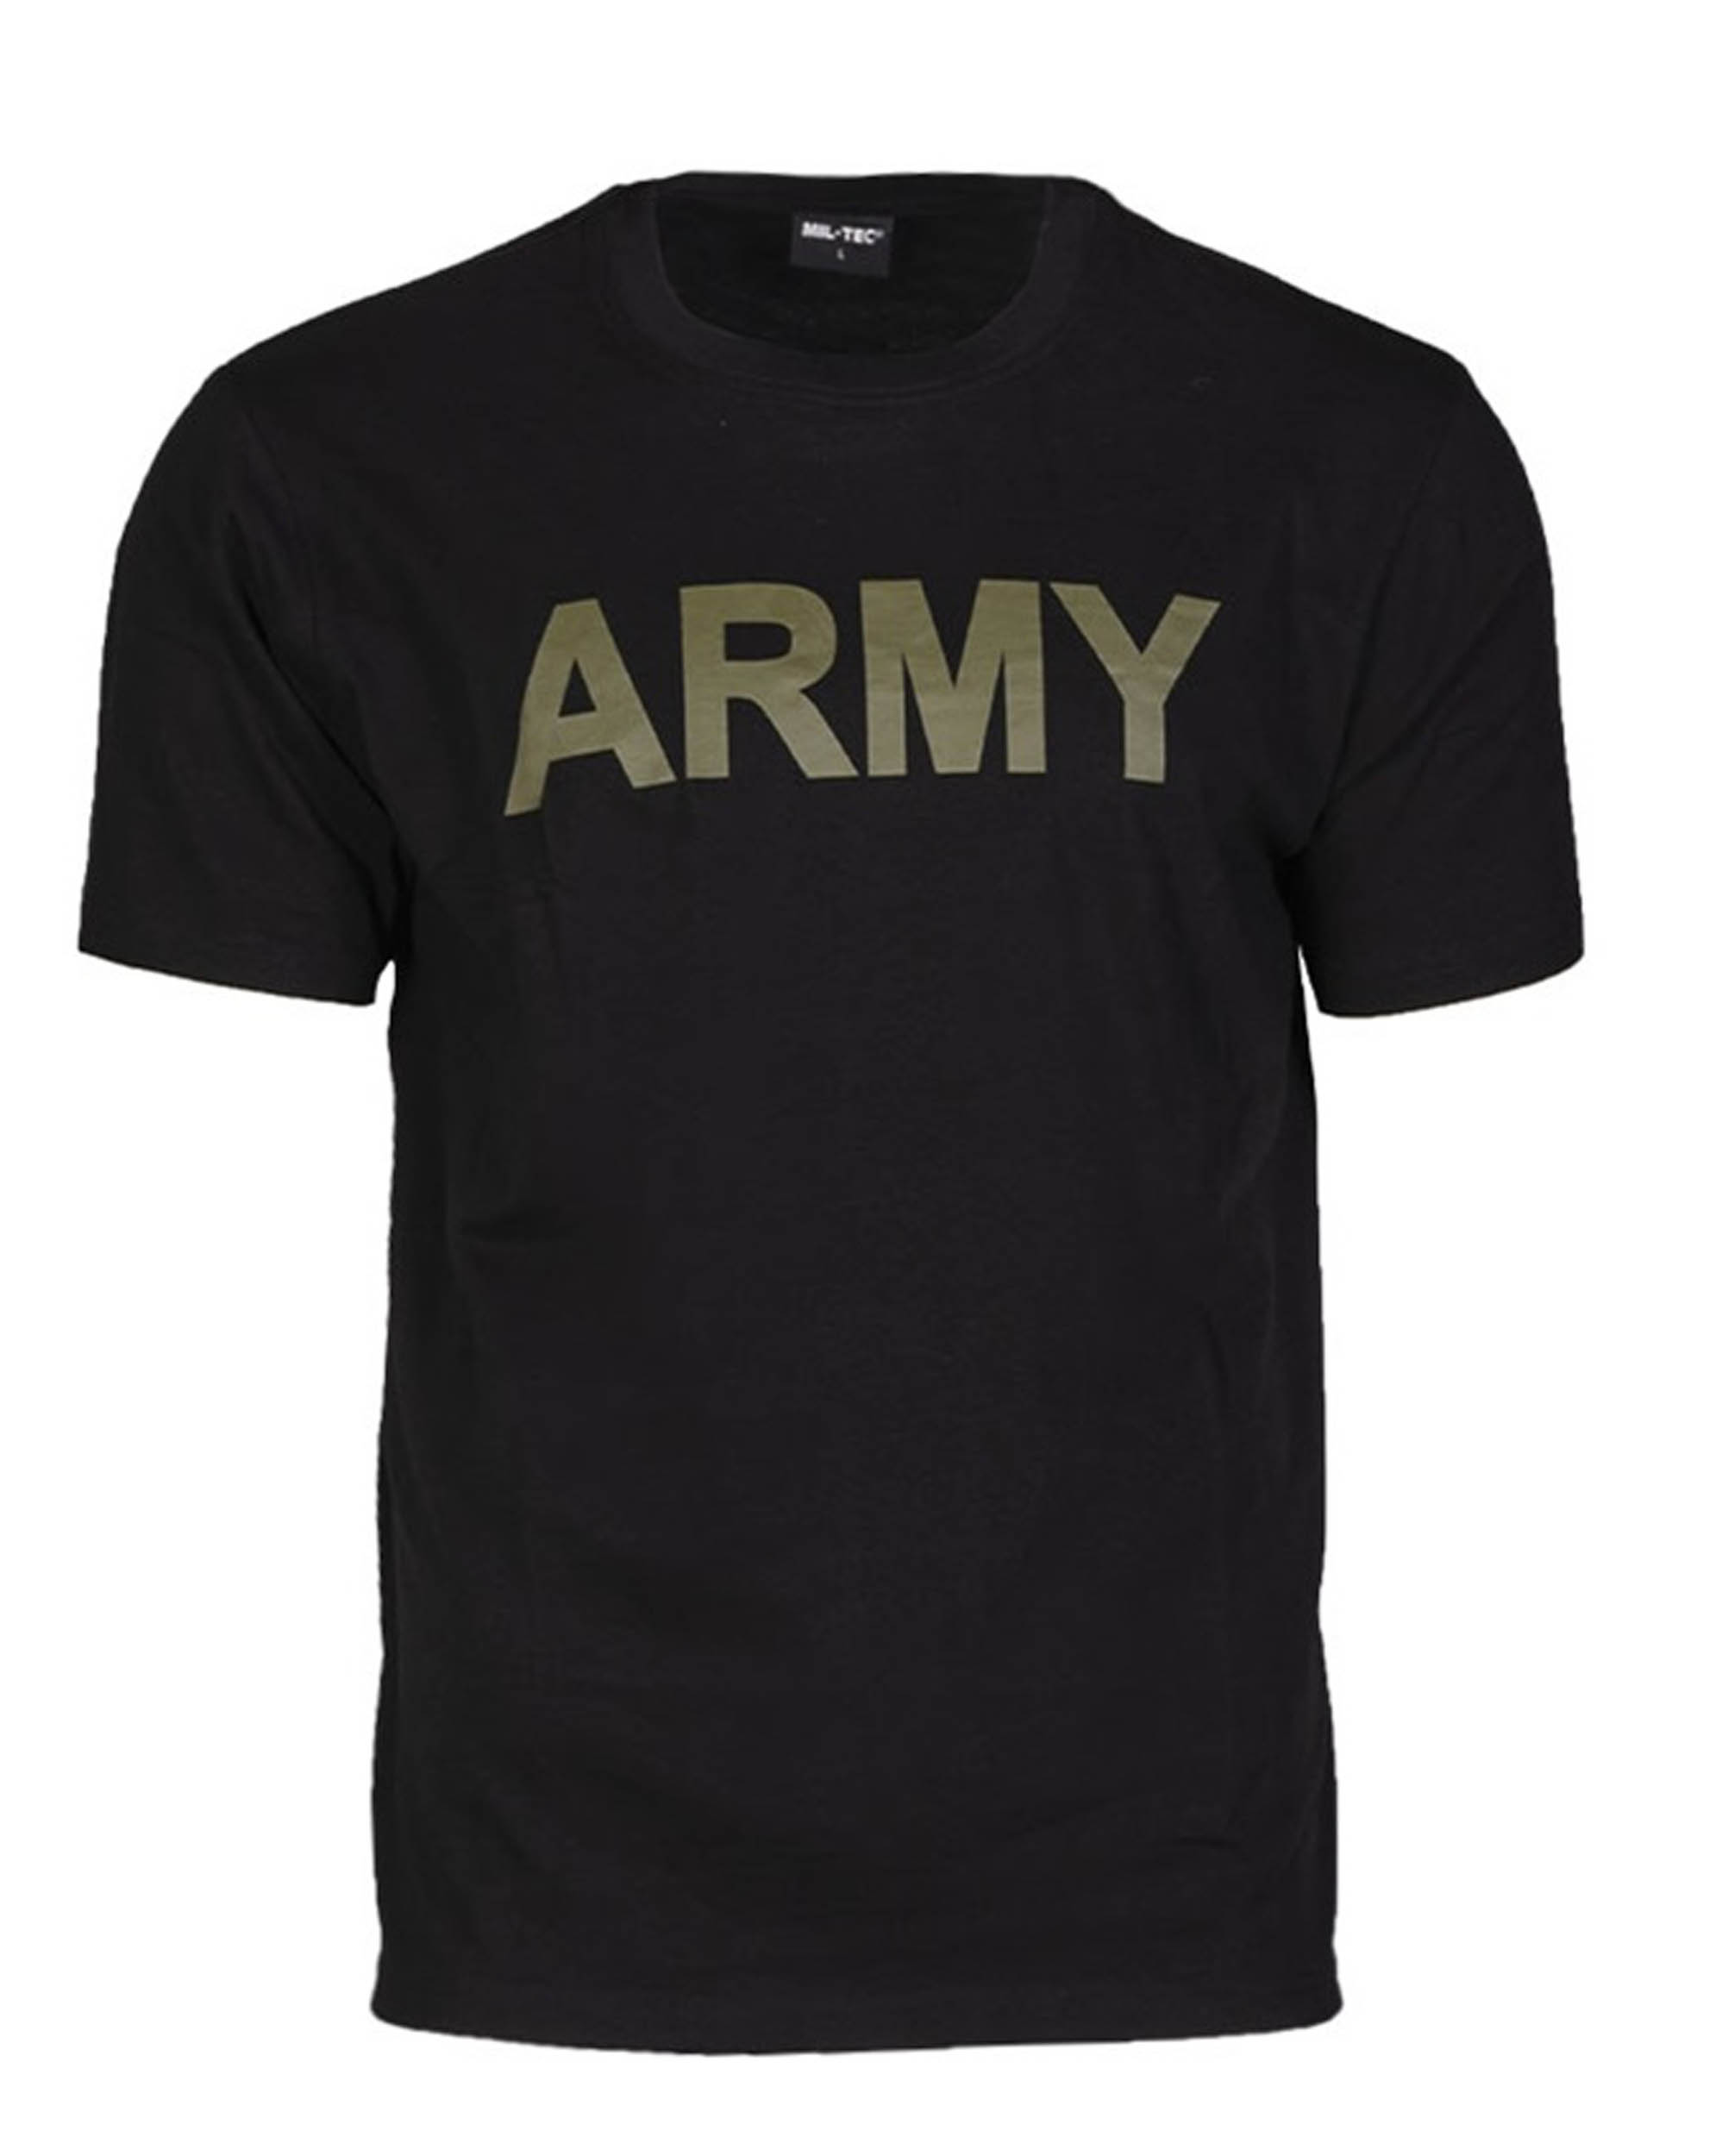 T-Shirt ARMY Edition limitée - Taille XL - Miltec